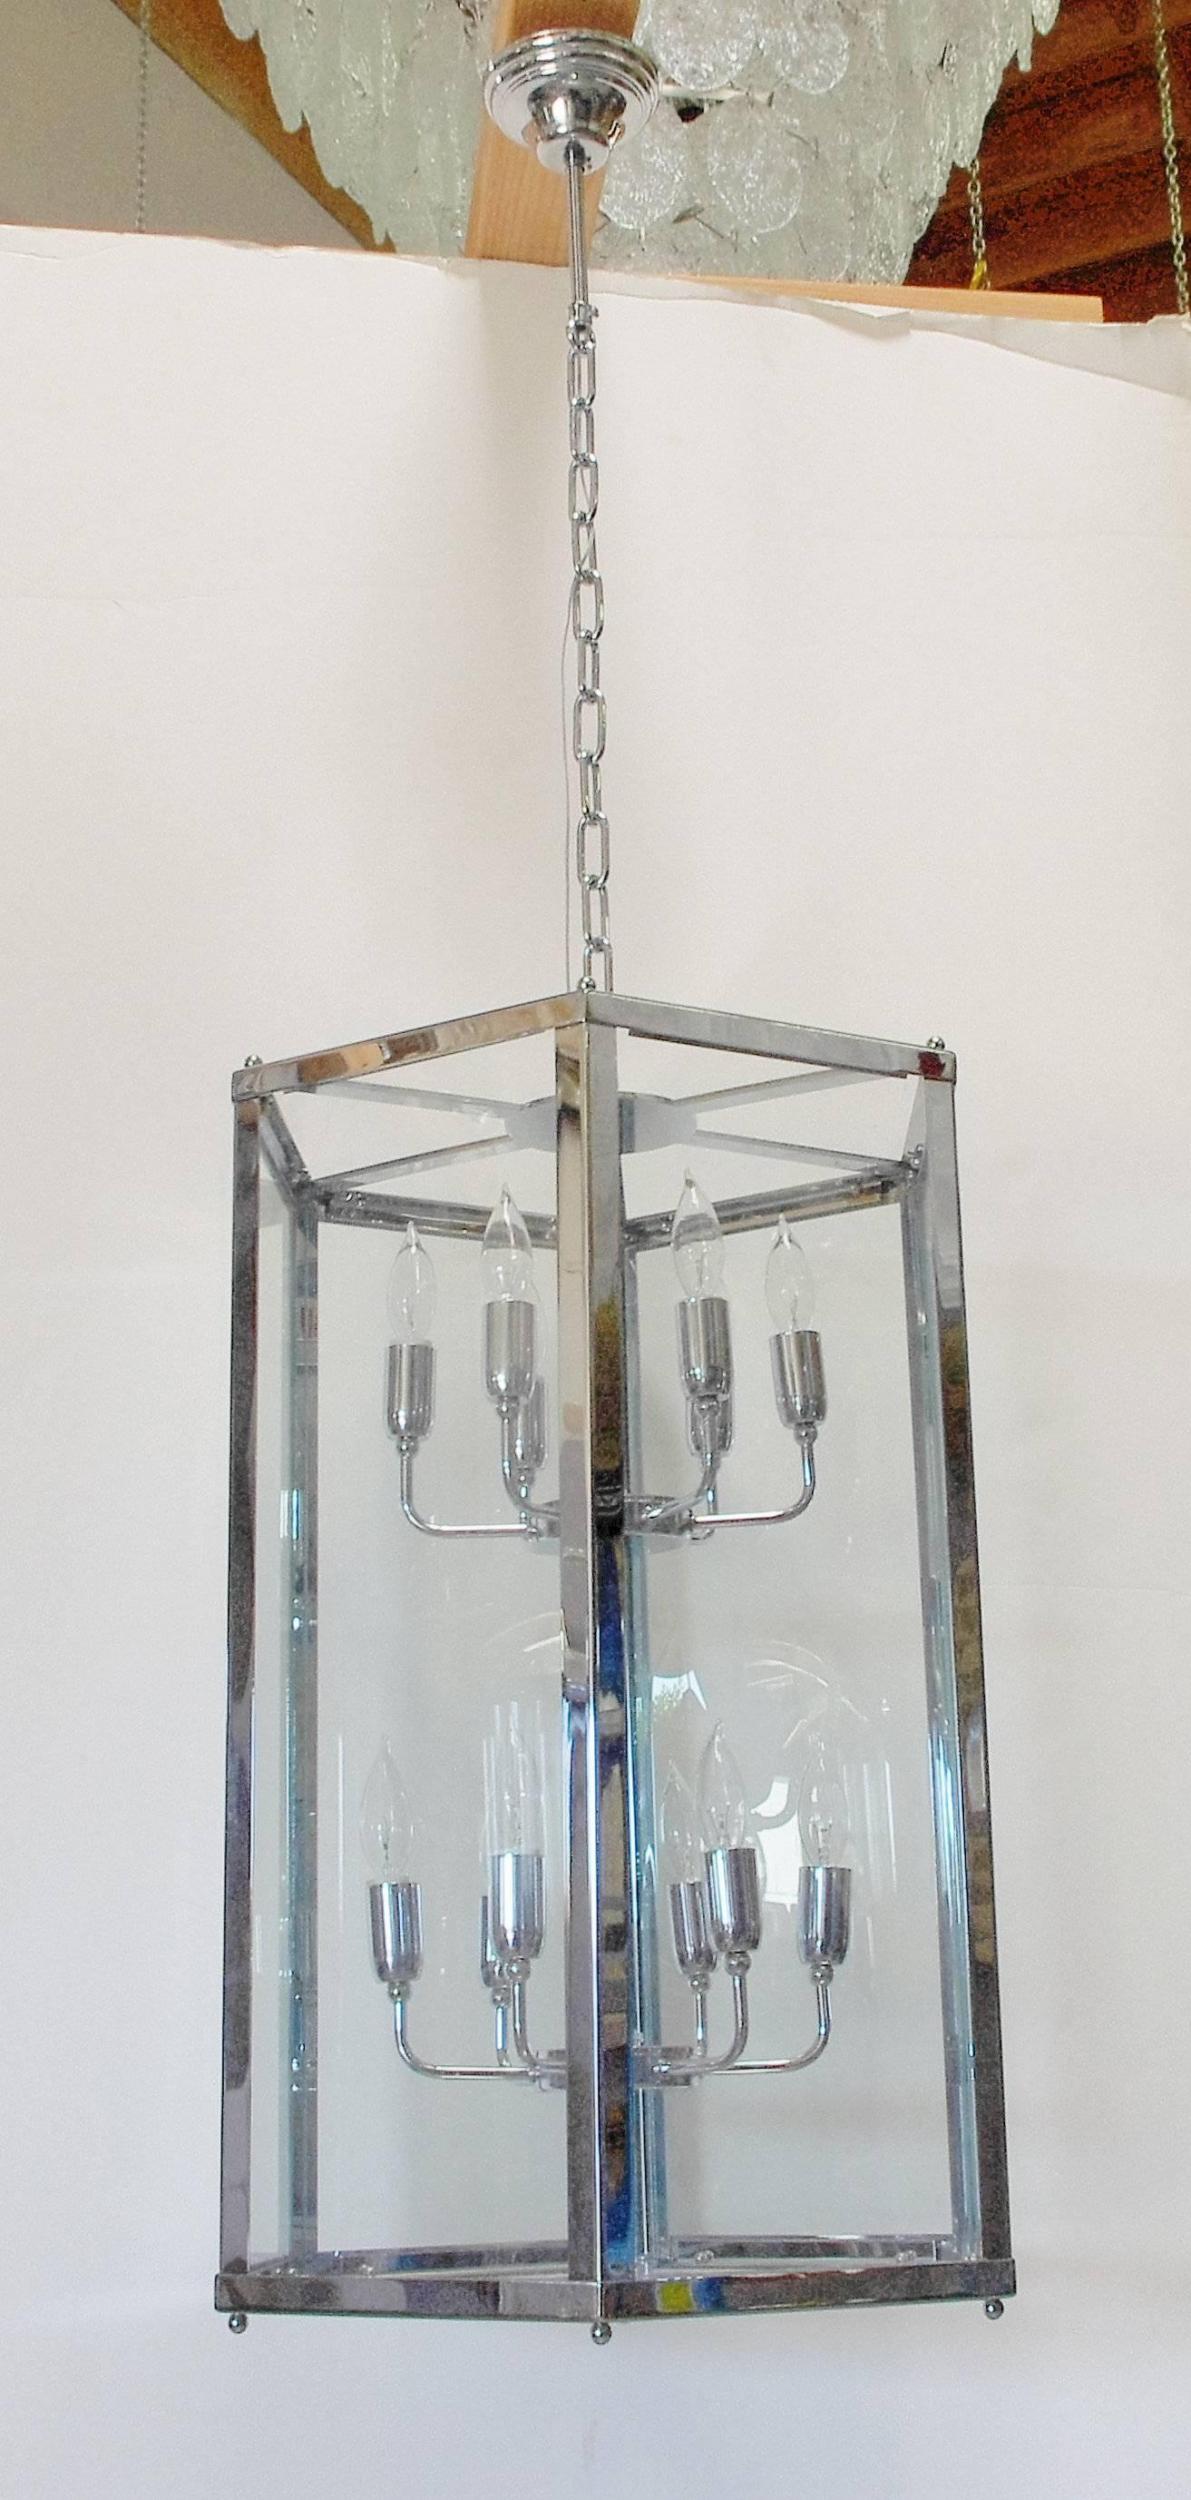 One of a kind modern Italian hexagon shaped lantern with glass and chrome frame / Made in Italy, 1990s.

Measurements does not include chain and canopy.